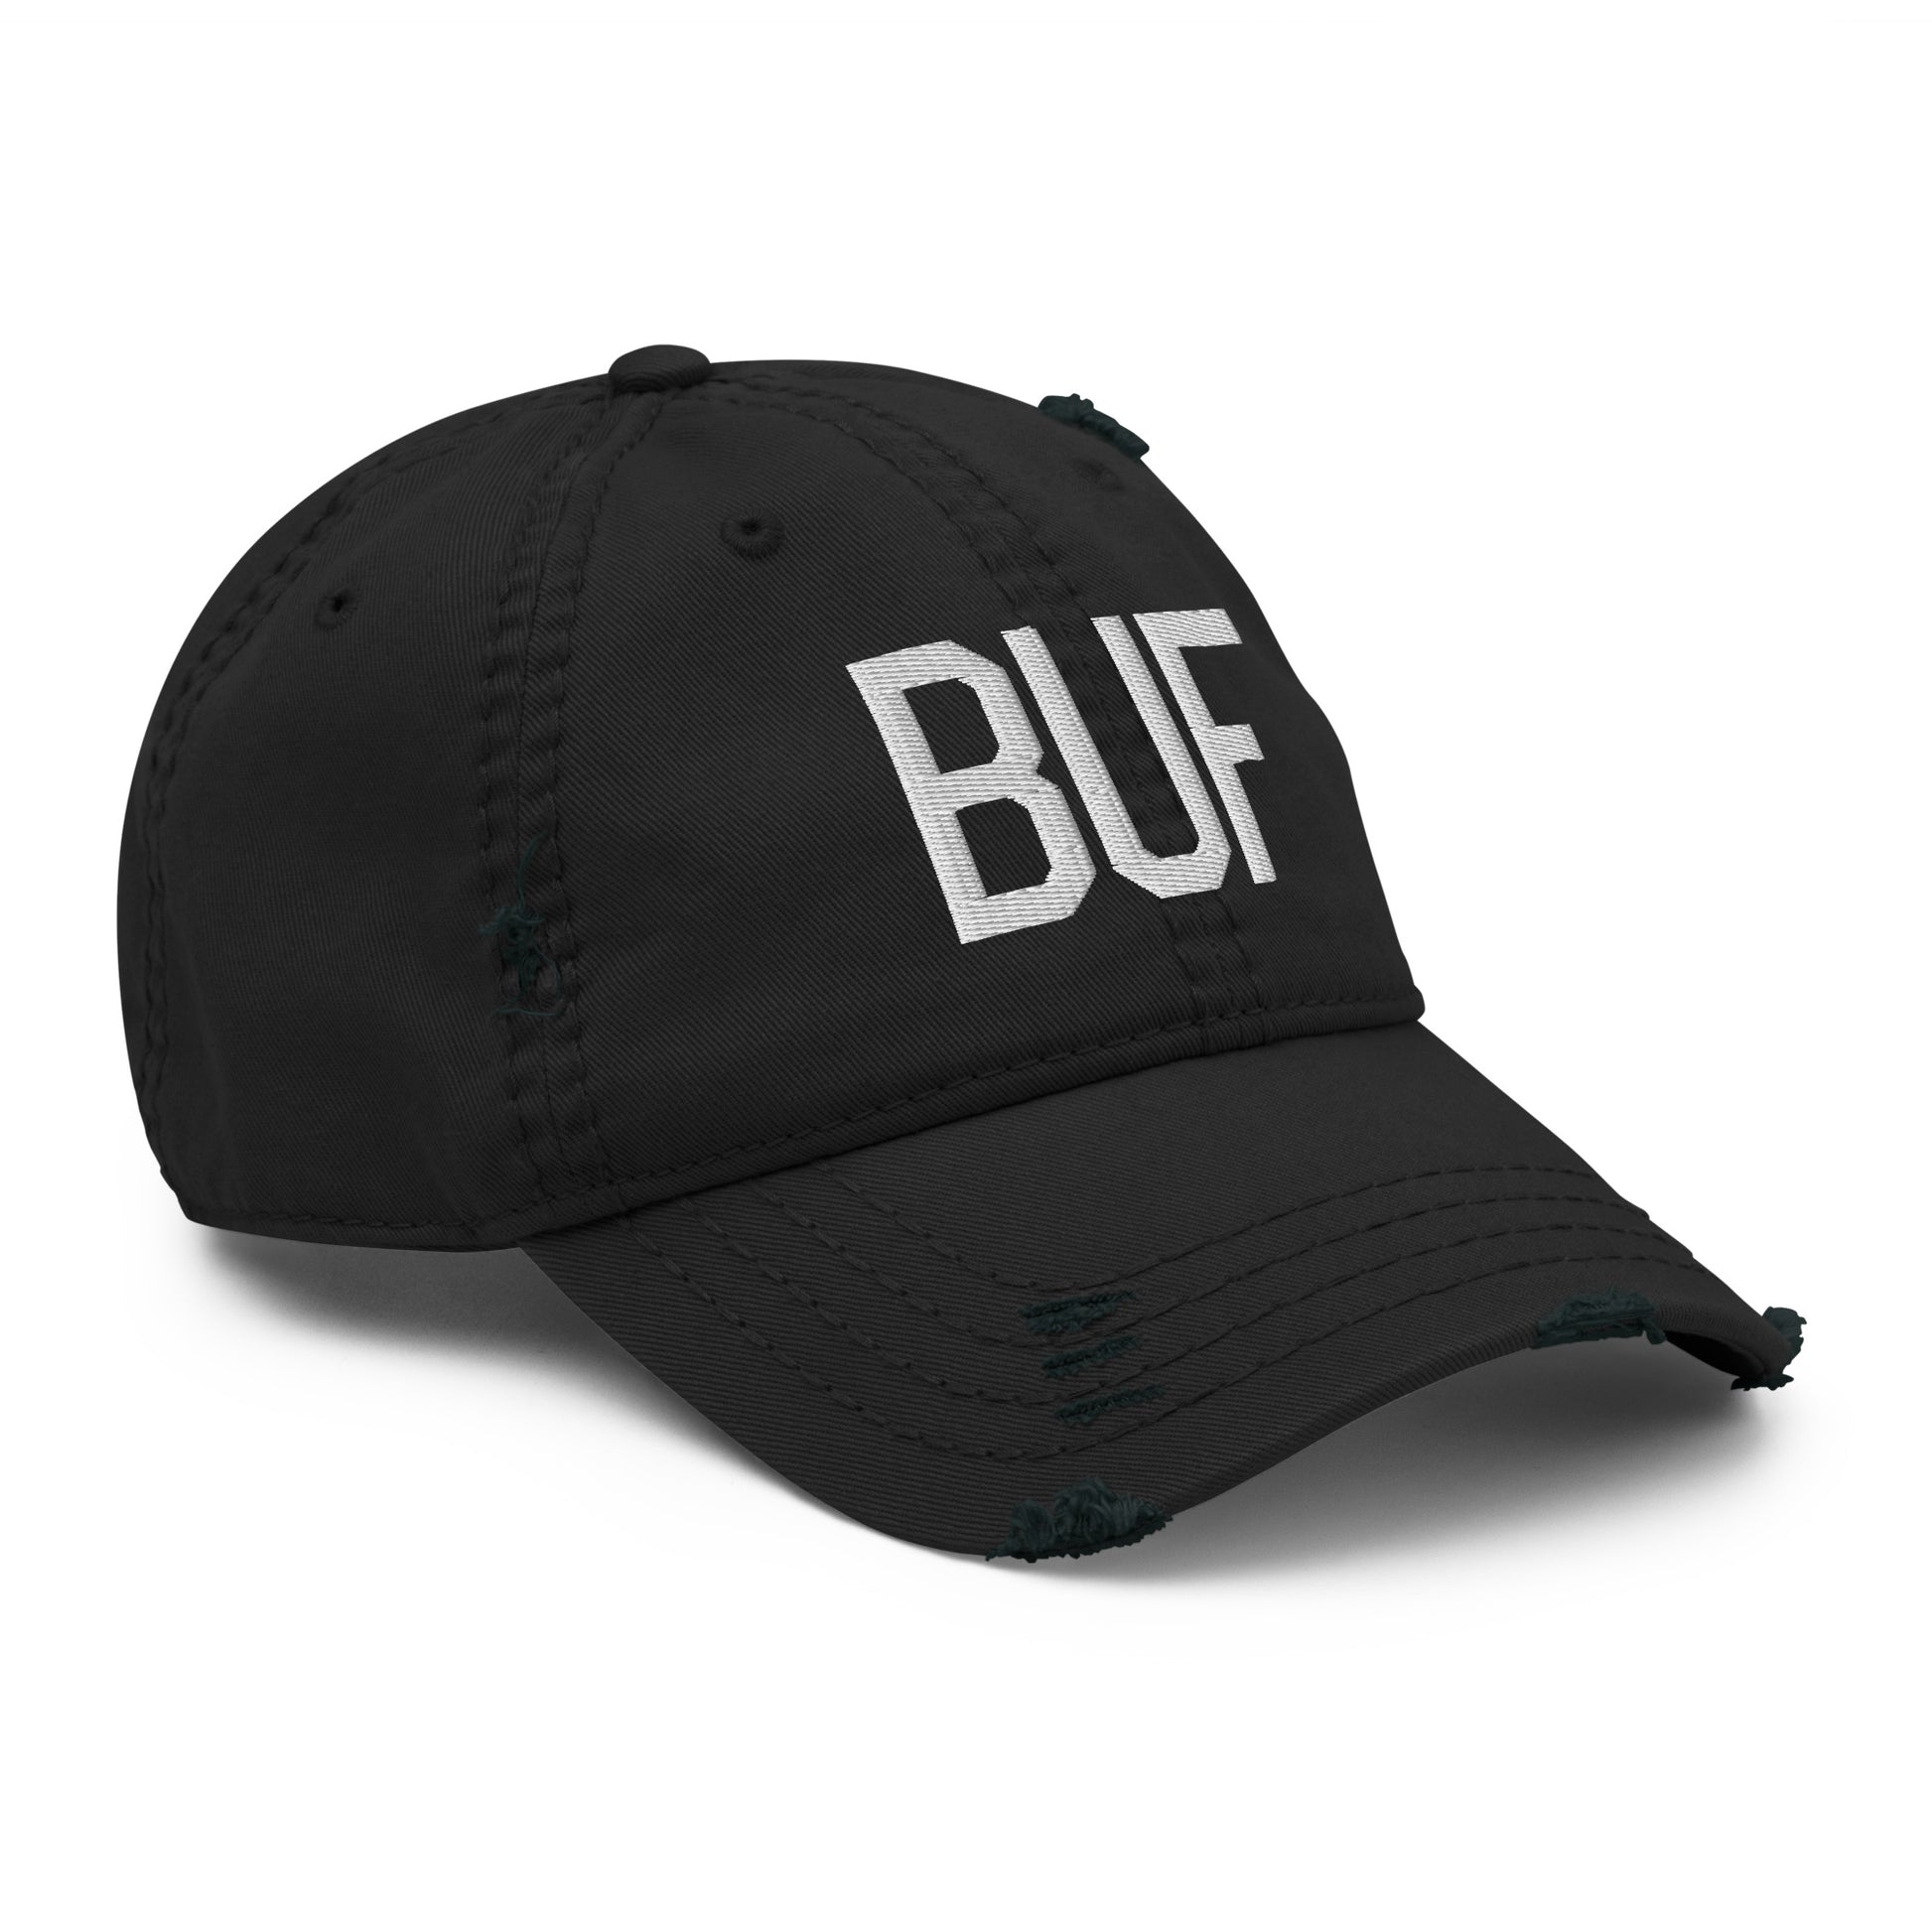 Airport Code Distressed Hat - White • BUF Buffalo • YHM Designs - Image 12